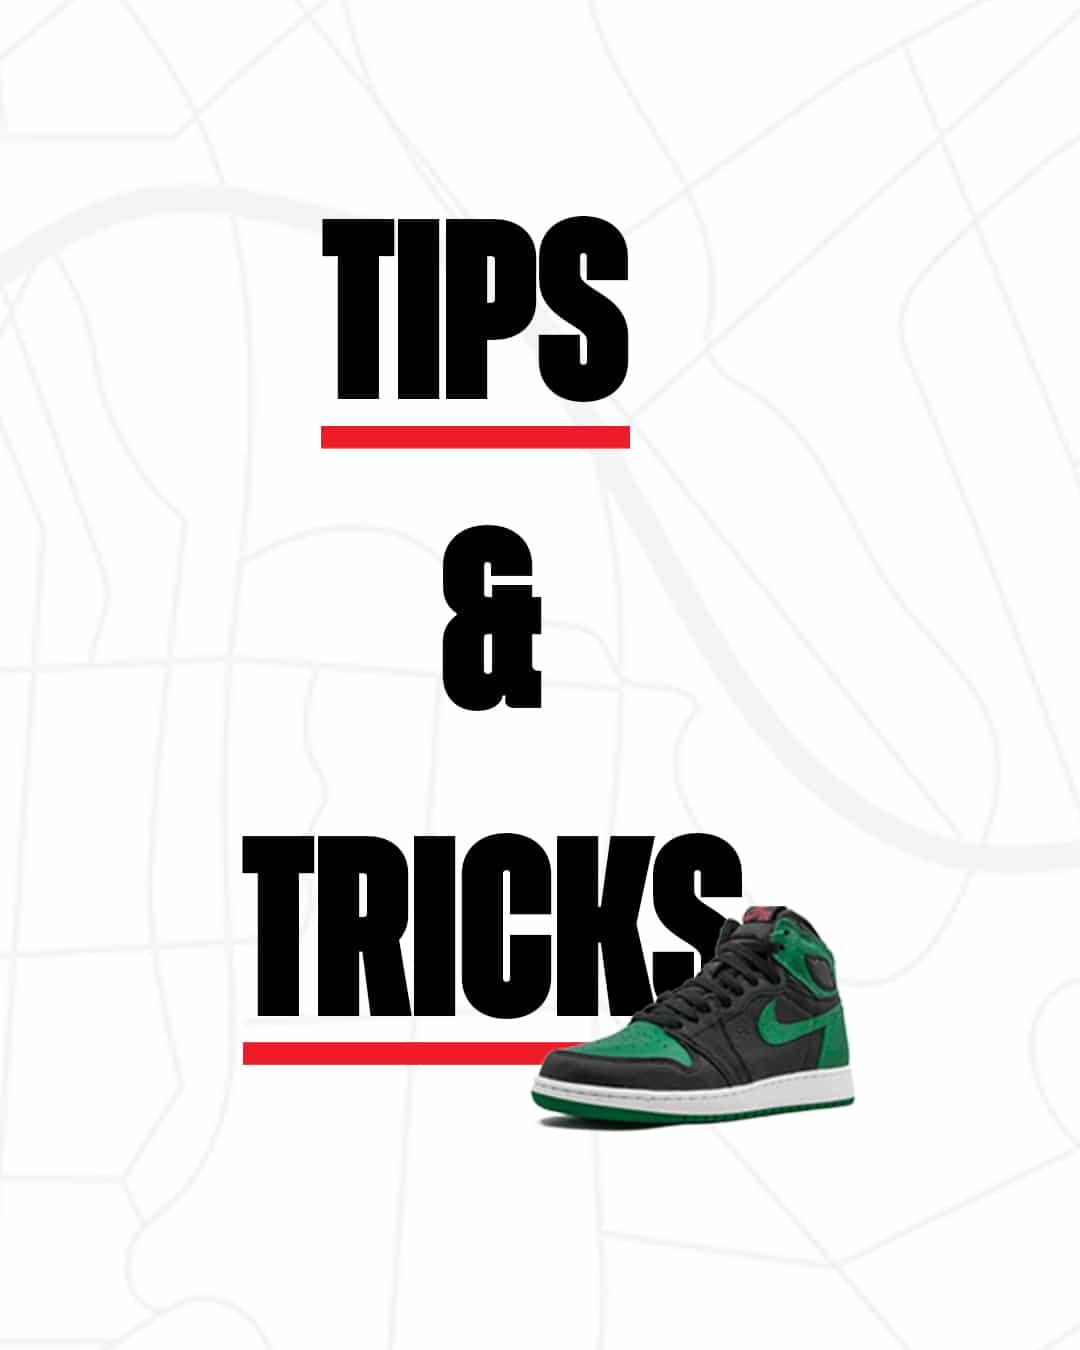 5 Easy Tips On How To Price Shoes For Resale